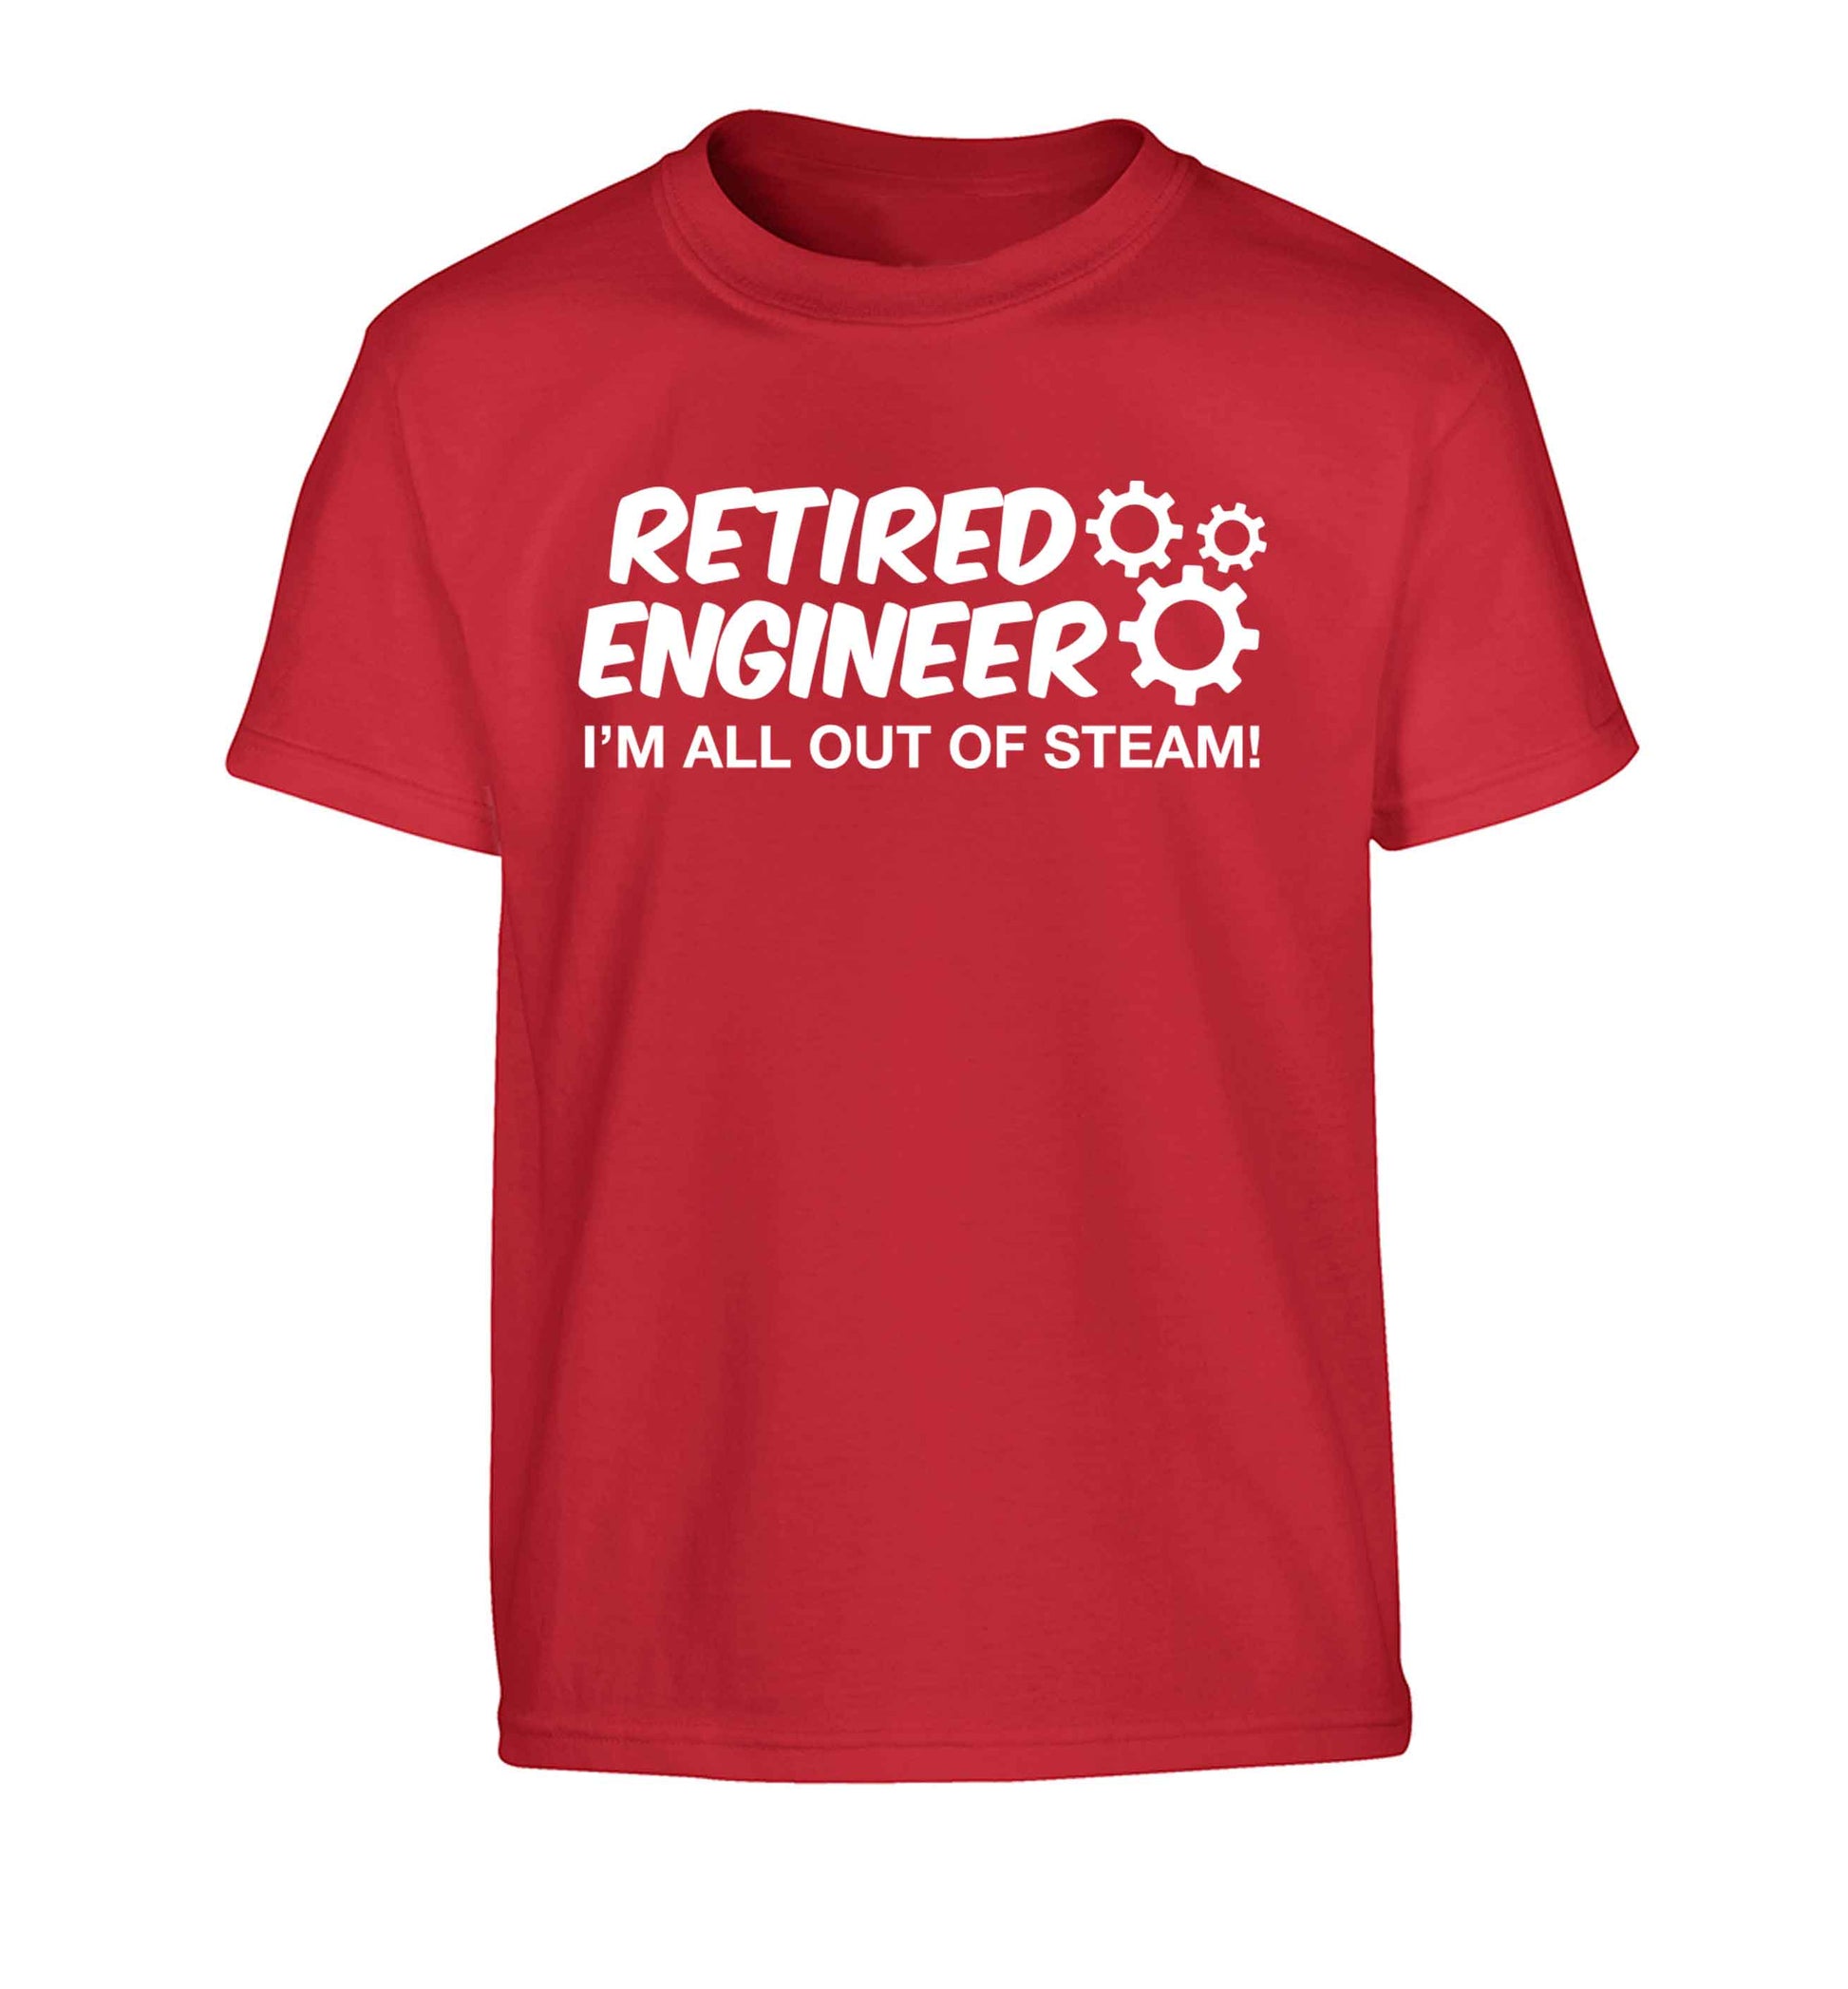 Retired engineer I'm all out of steam Children's red Tshirt 12-13 Years